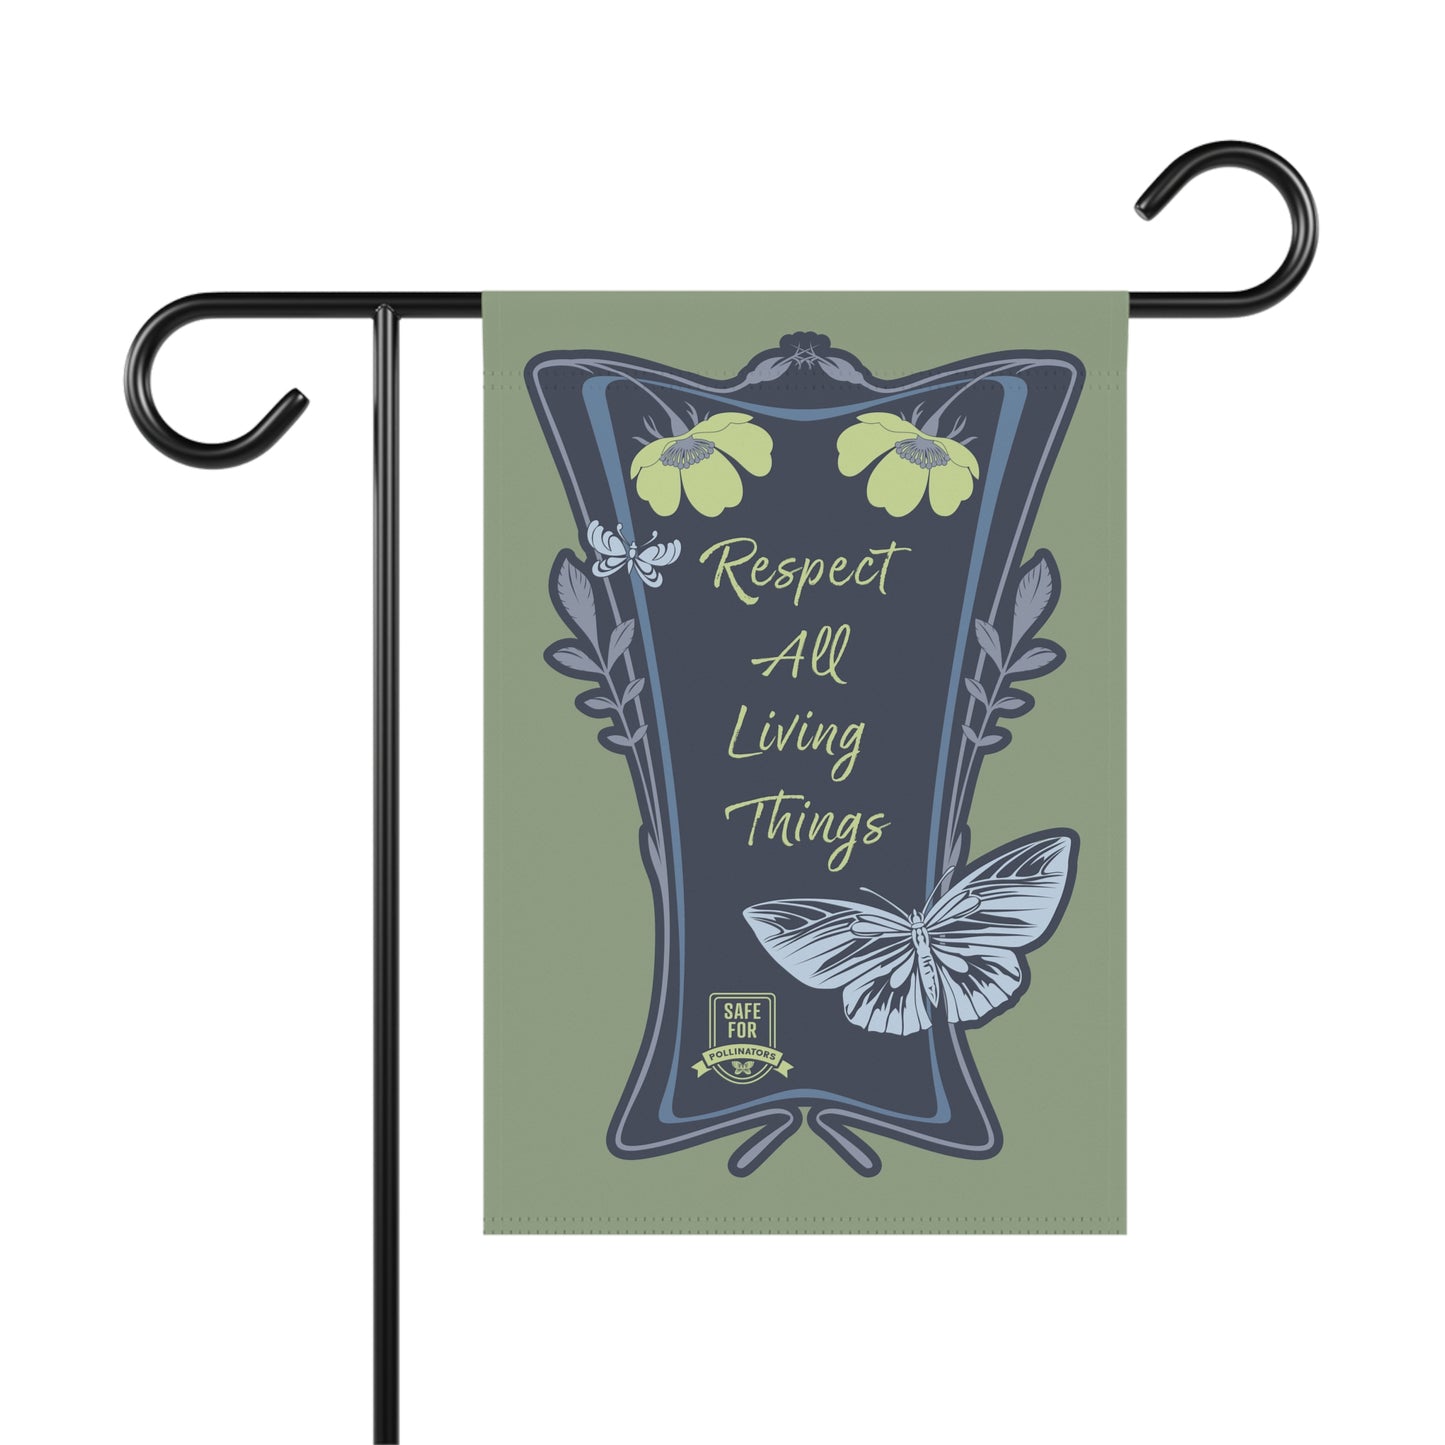 Respect All Living Things Flag House Banner, Eco Positivity Garden Message for Conservation of Bees, Butterflies, and Native Ecosystems